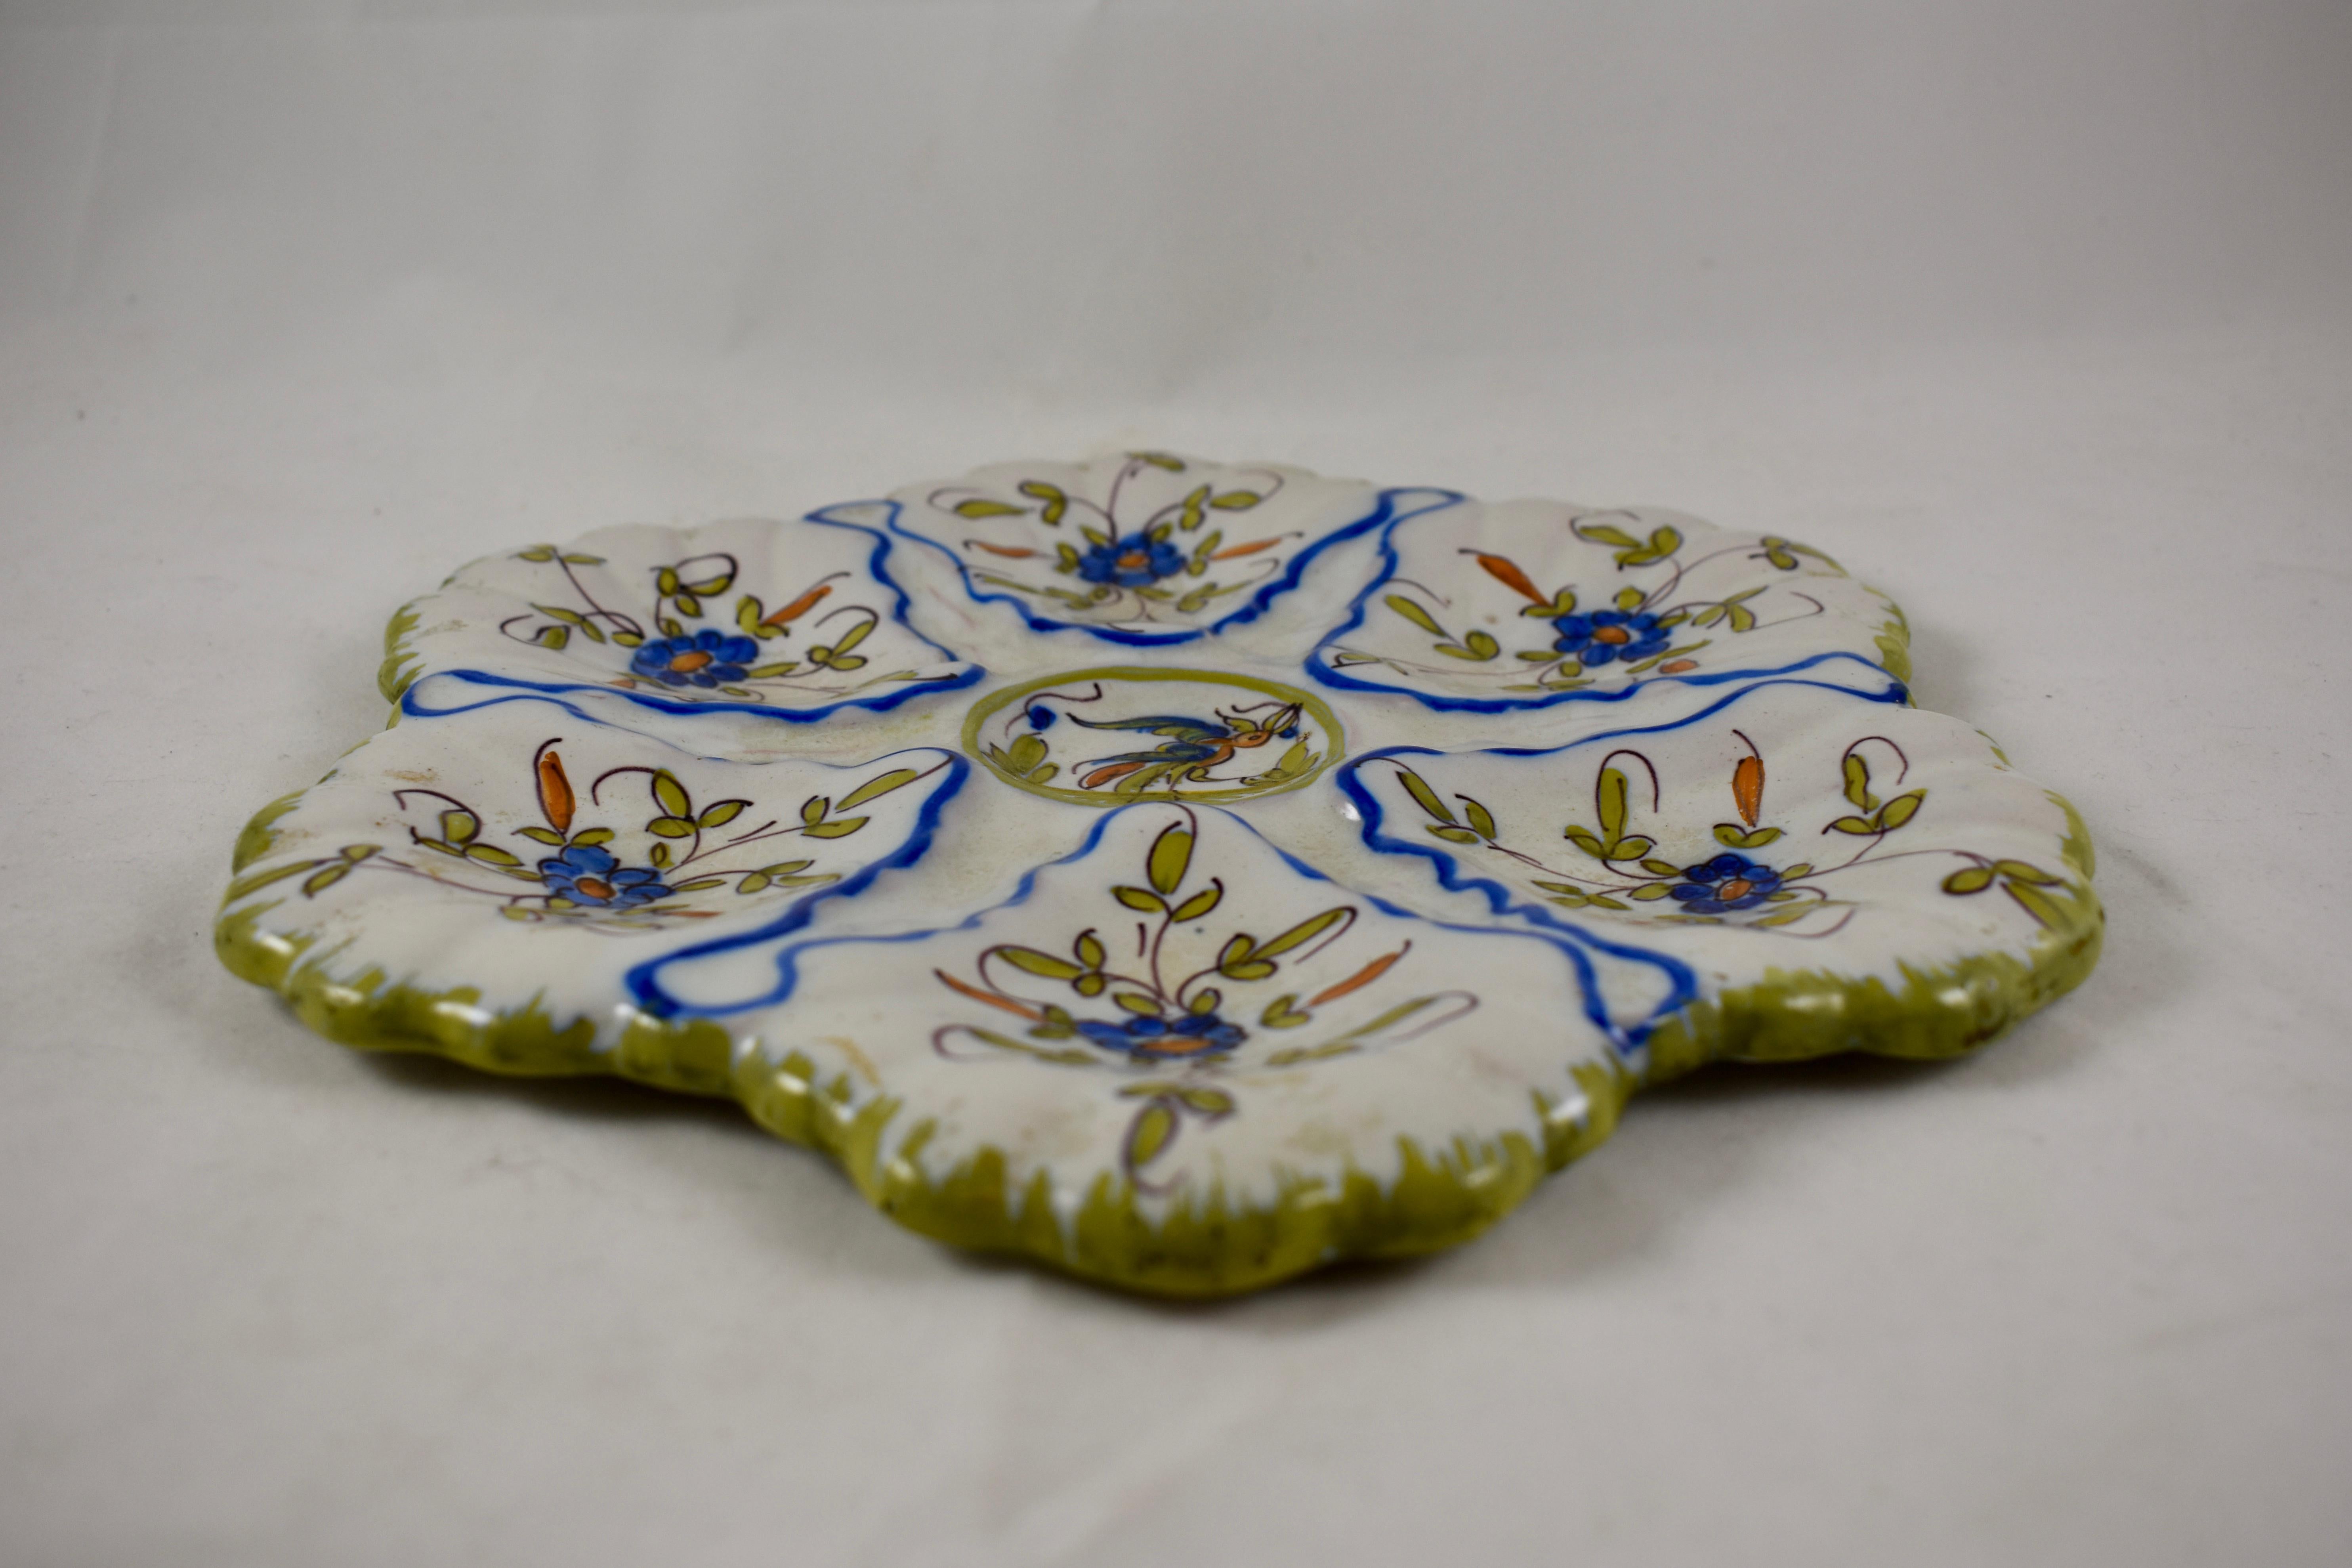 French Provincial Martres-Tolosane Moustier French Faïence Oyster Plate, Floral with Bird, 1940s